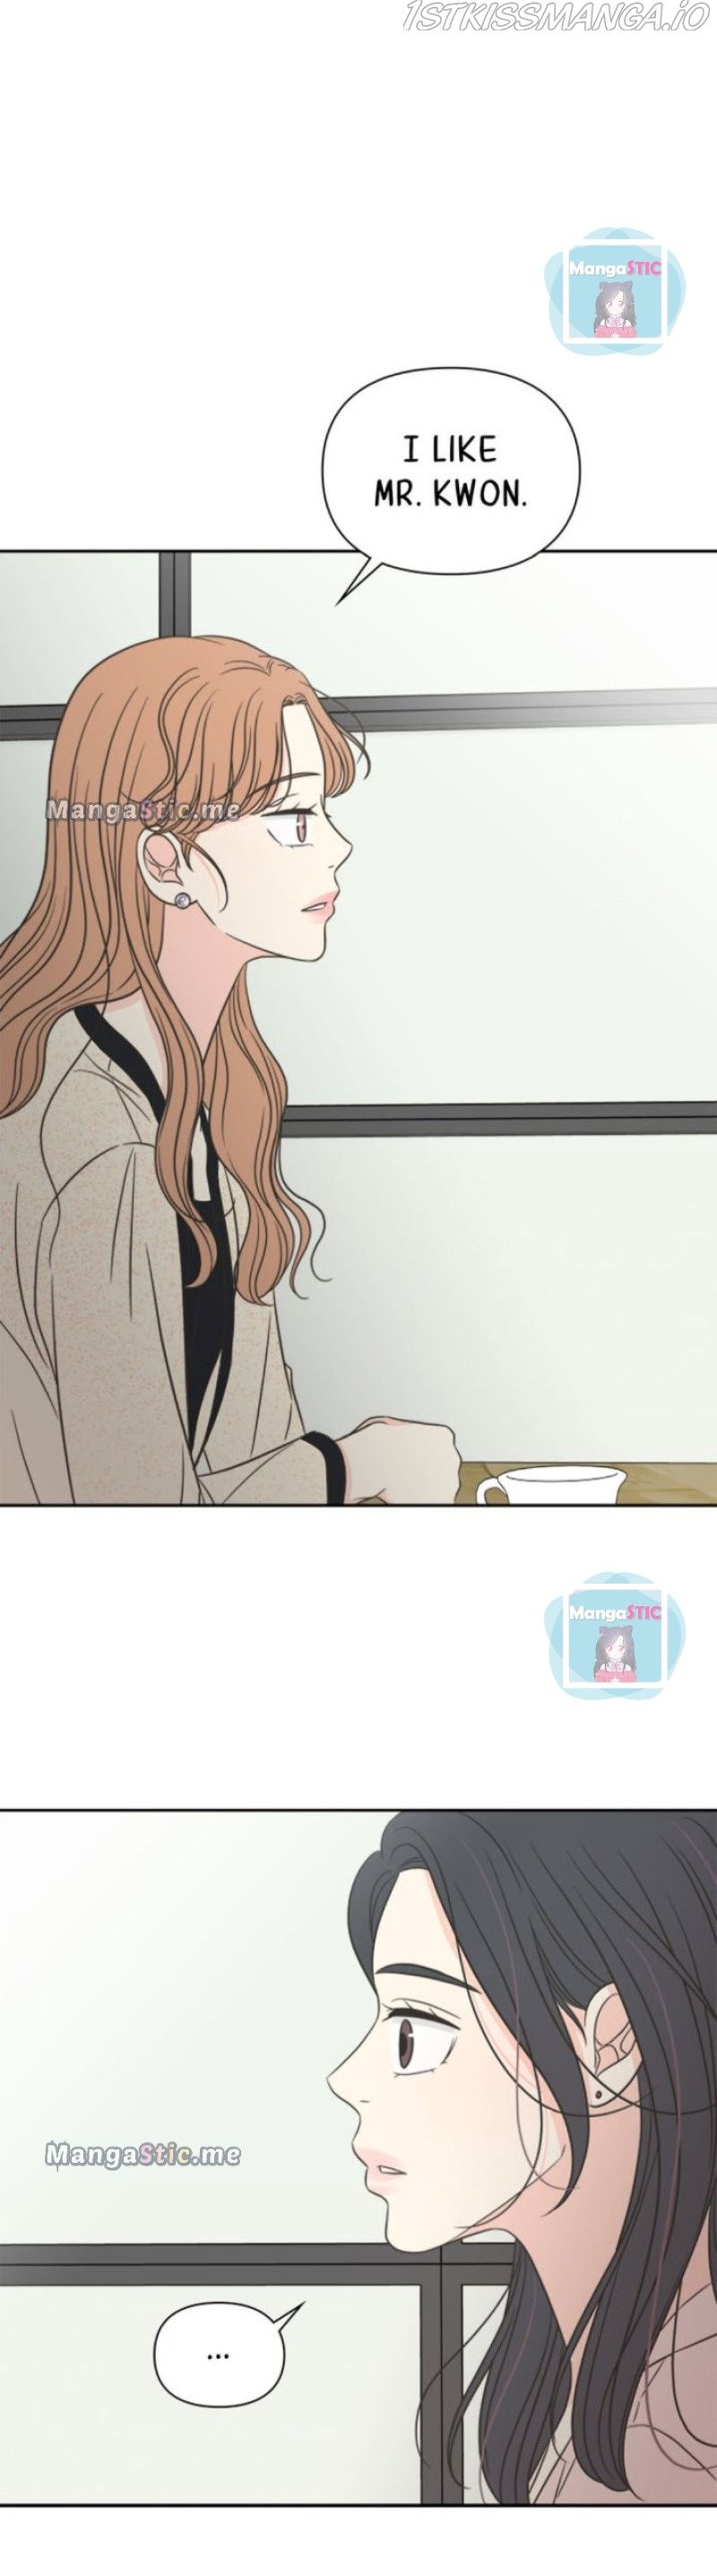 Check In to My Heart chapter 39 - Page 7